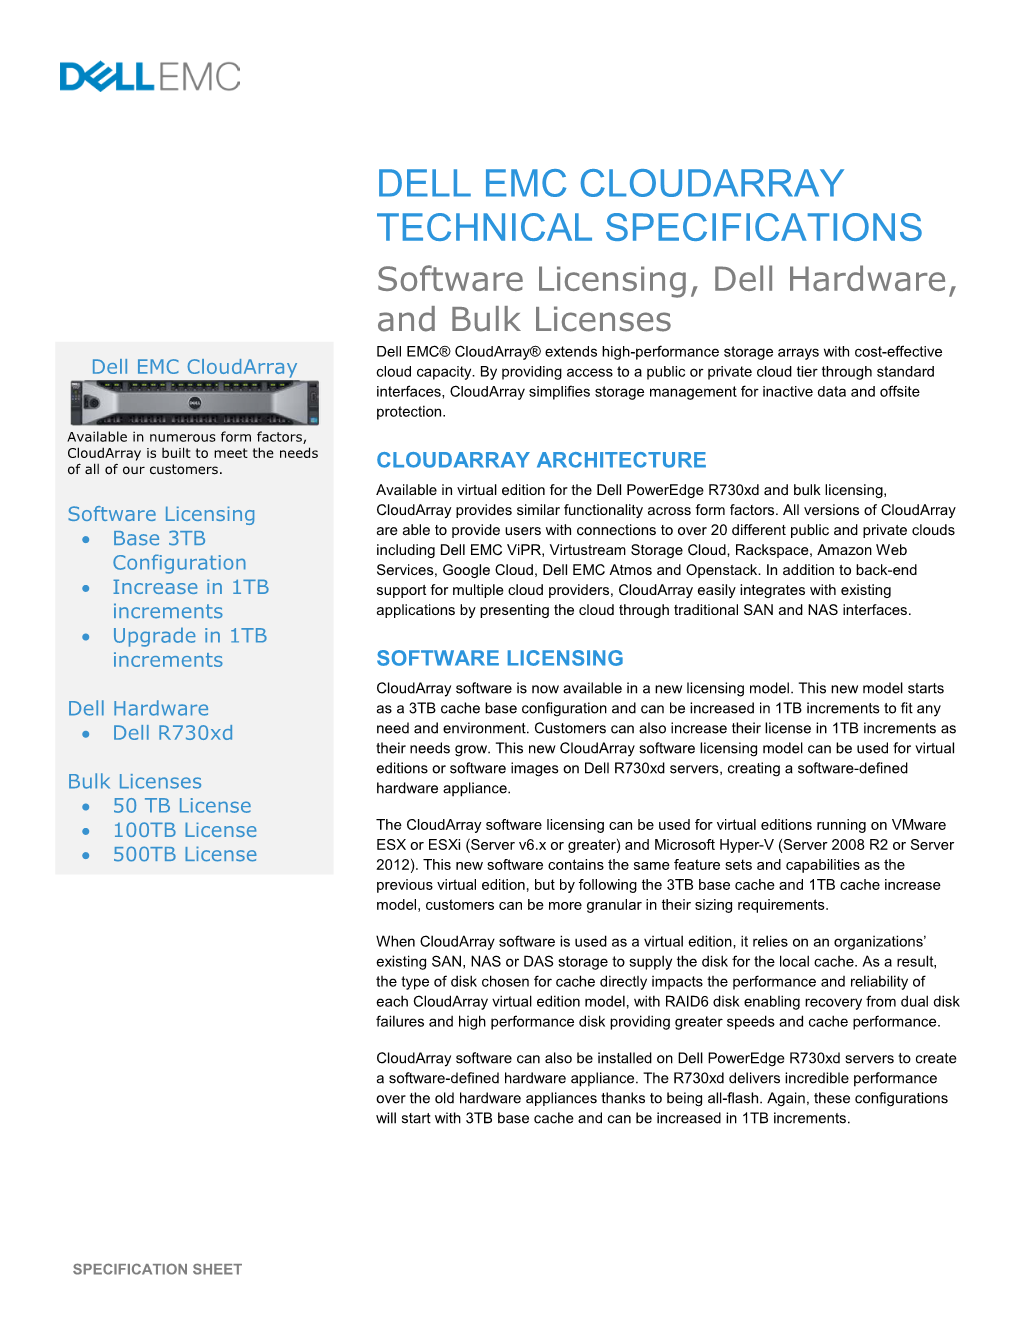 Dell EMC Cloudarray Technical Specifications